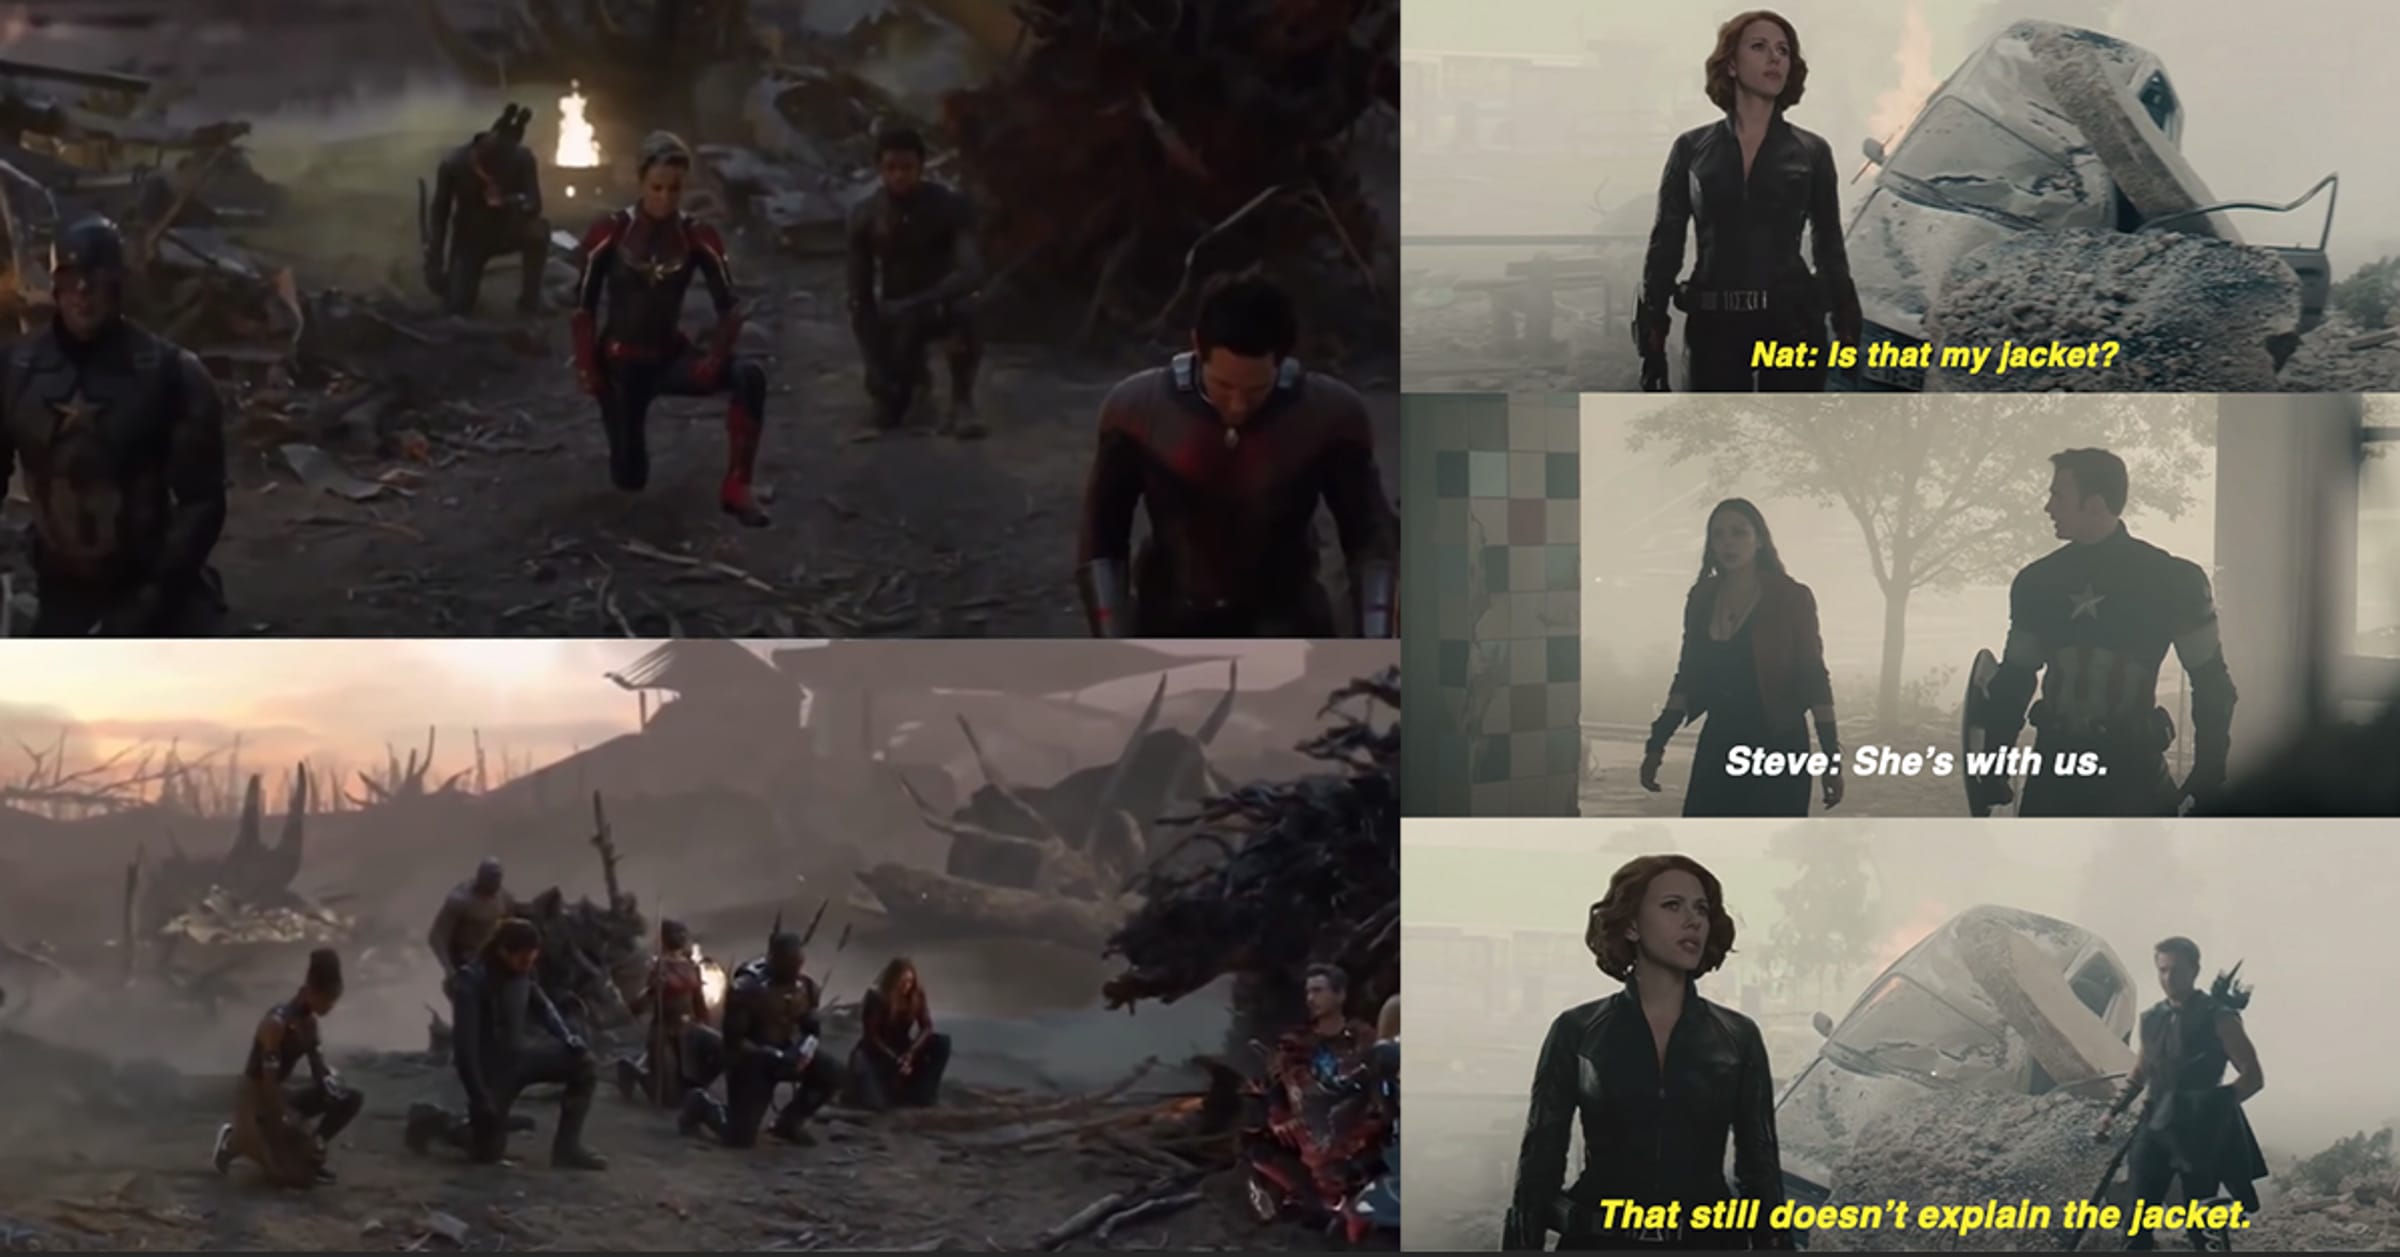 We need more epic scenes and Avengers Assemble moments. The